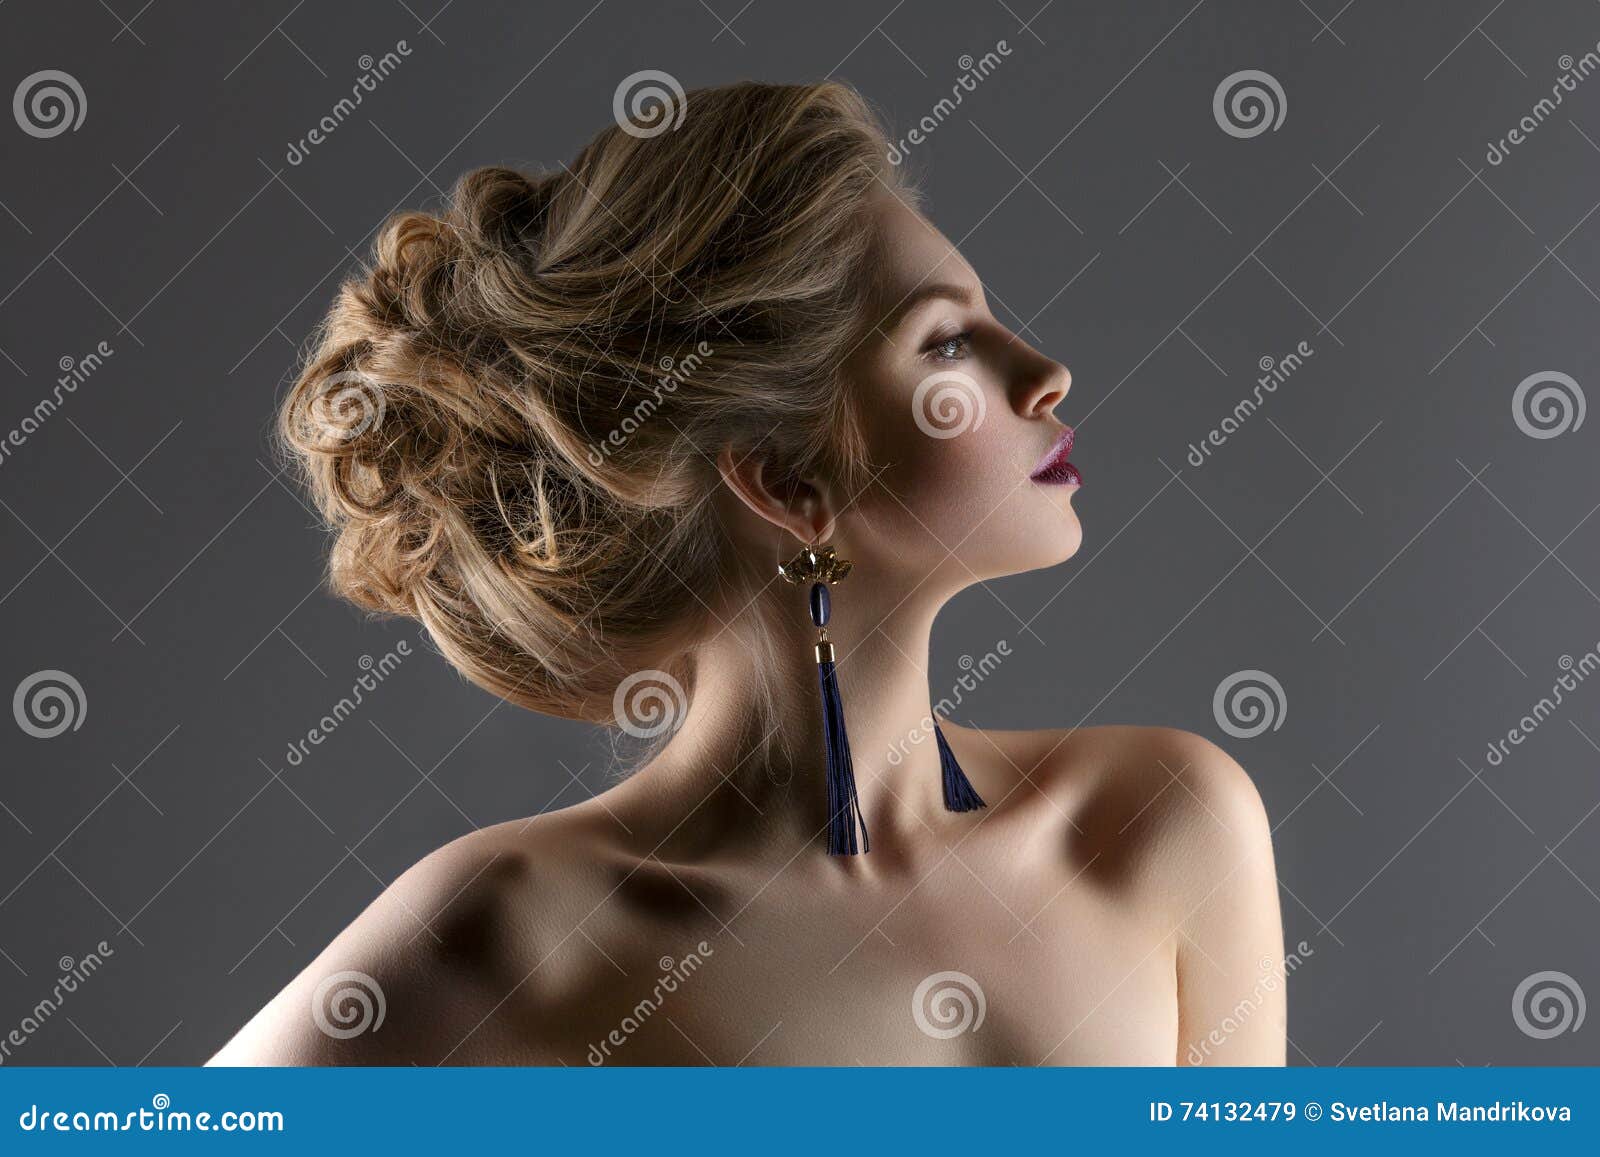 Beautiful Girl with Long Neck Stock Image - Image of bright, head: 74132479